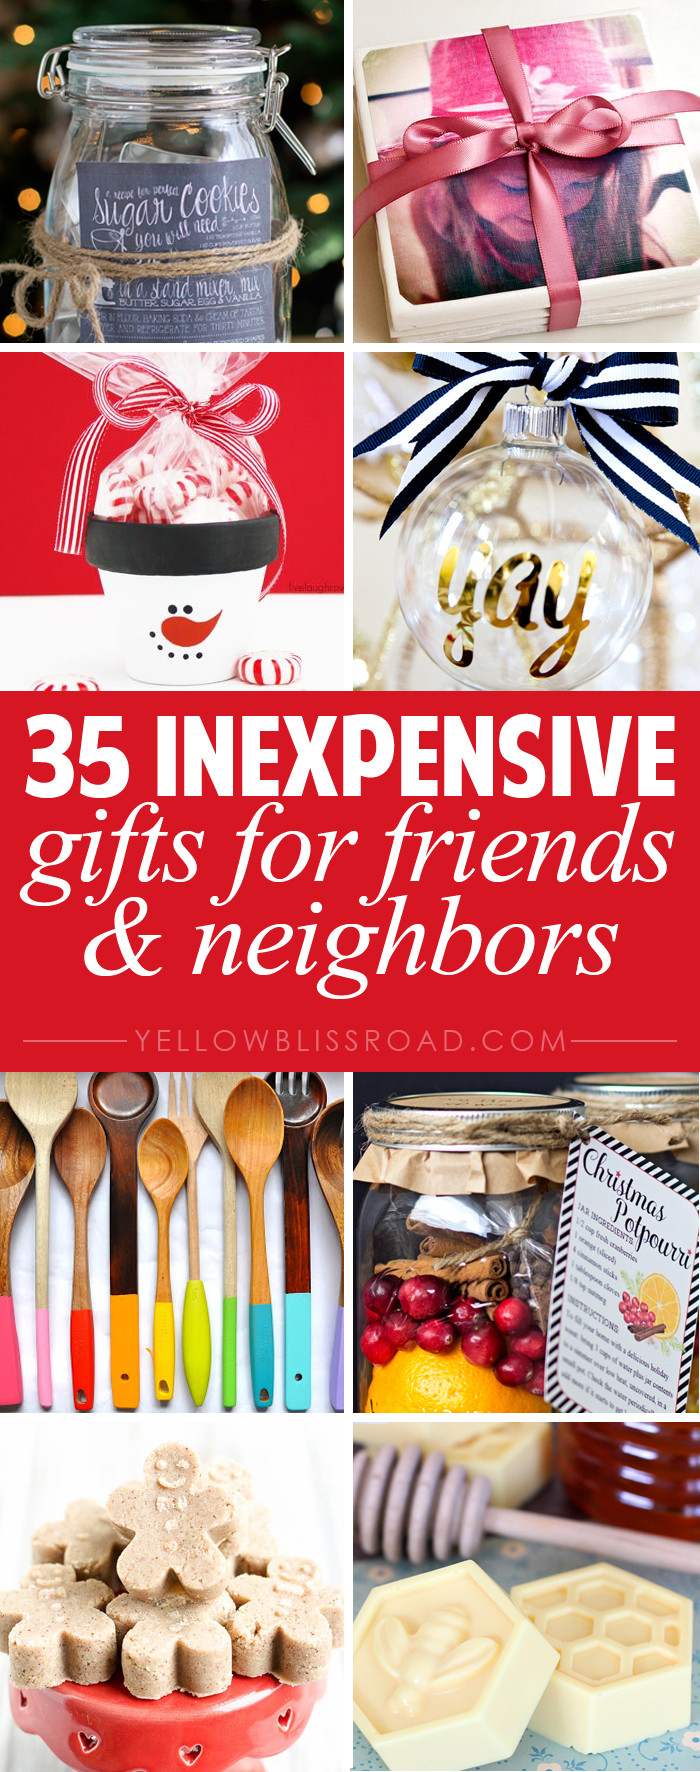 Holiday Gift Ideas For Best Friends
 35 Gift Ideas for Neighbors and Friends Yellow Bliss Road